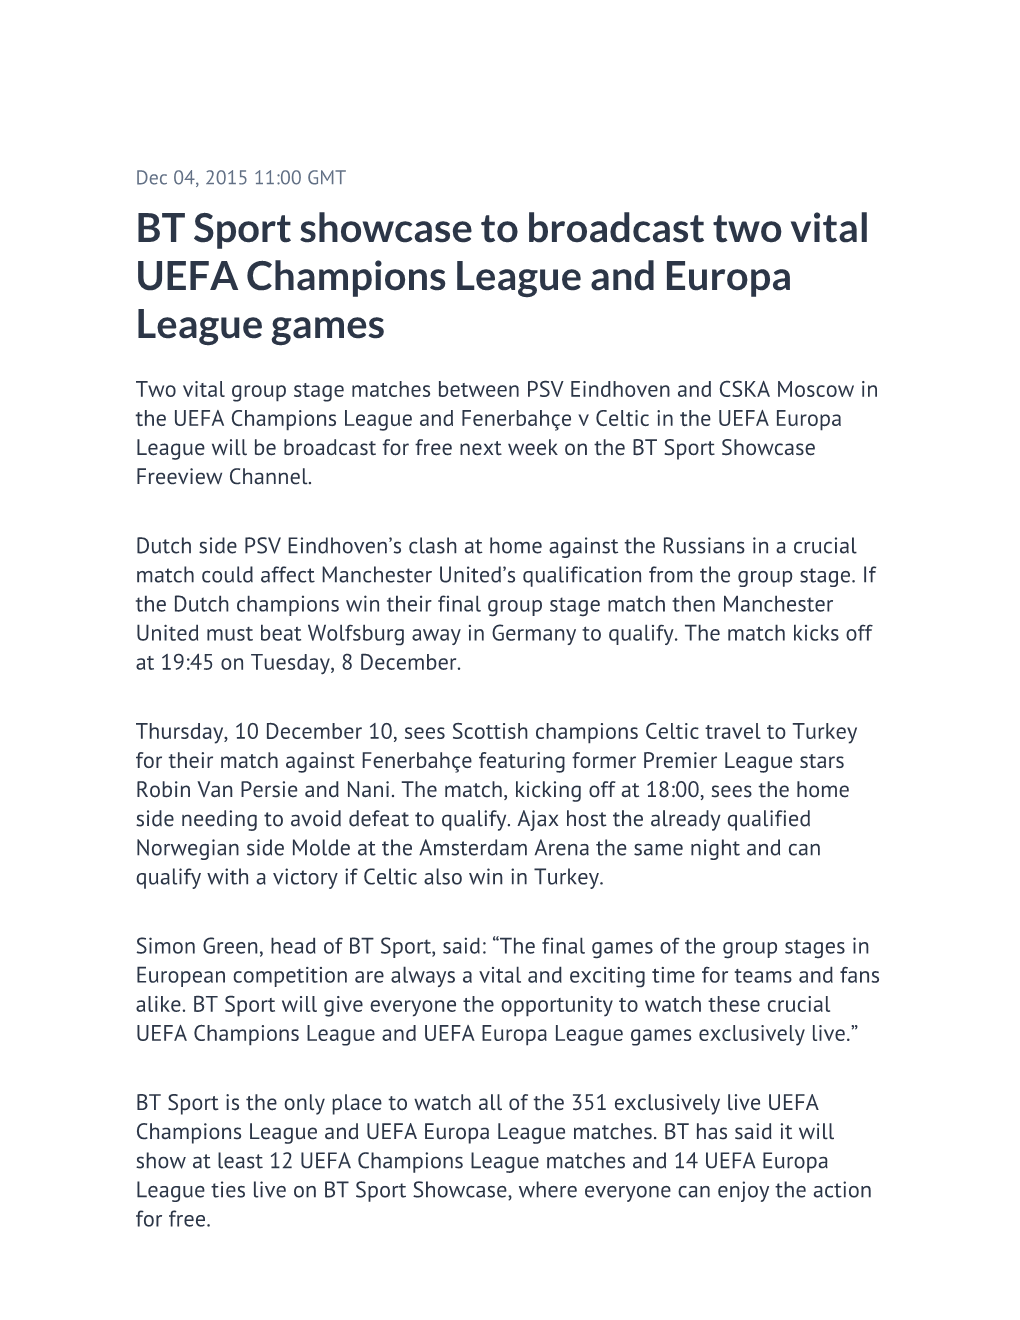 BT Sport Showcase to Broadcast Two Vital UEFA Champions League and Europa League Games